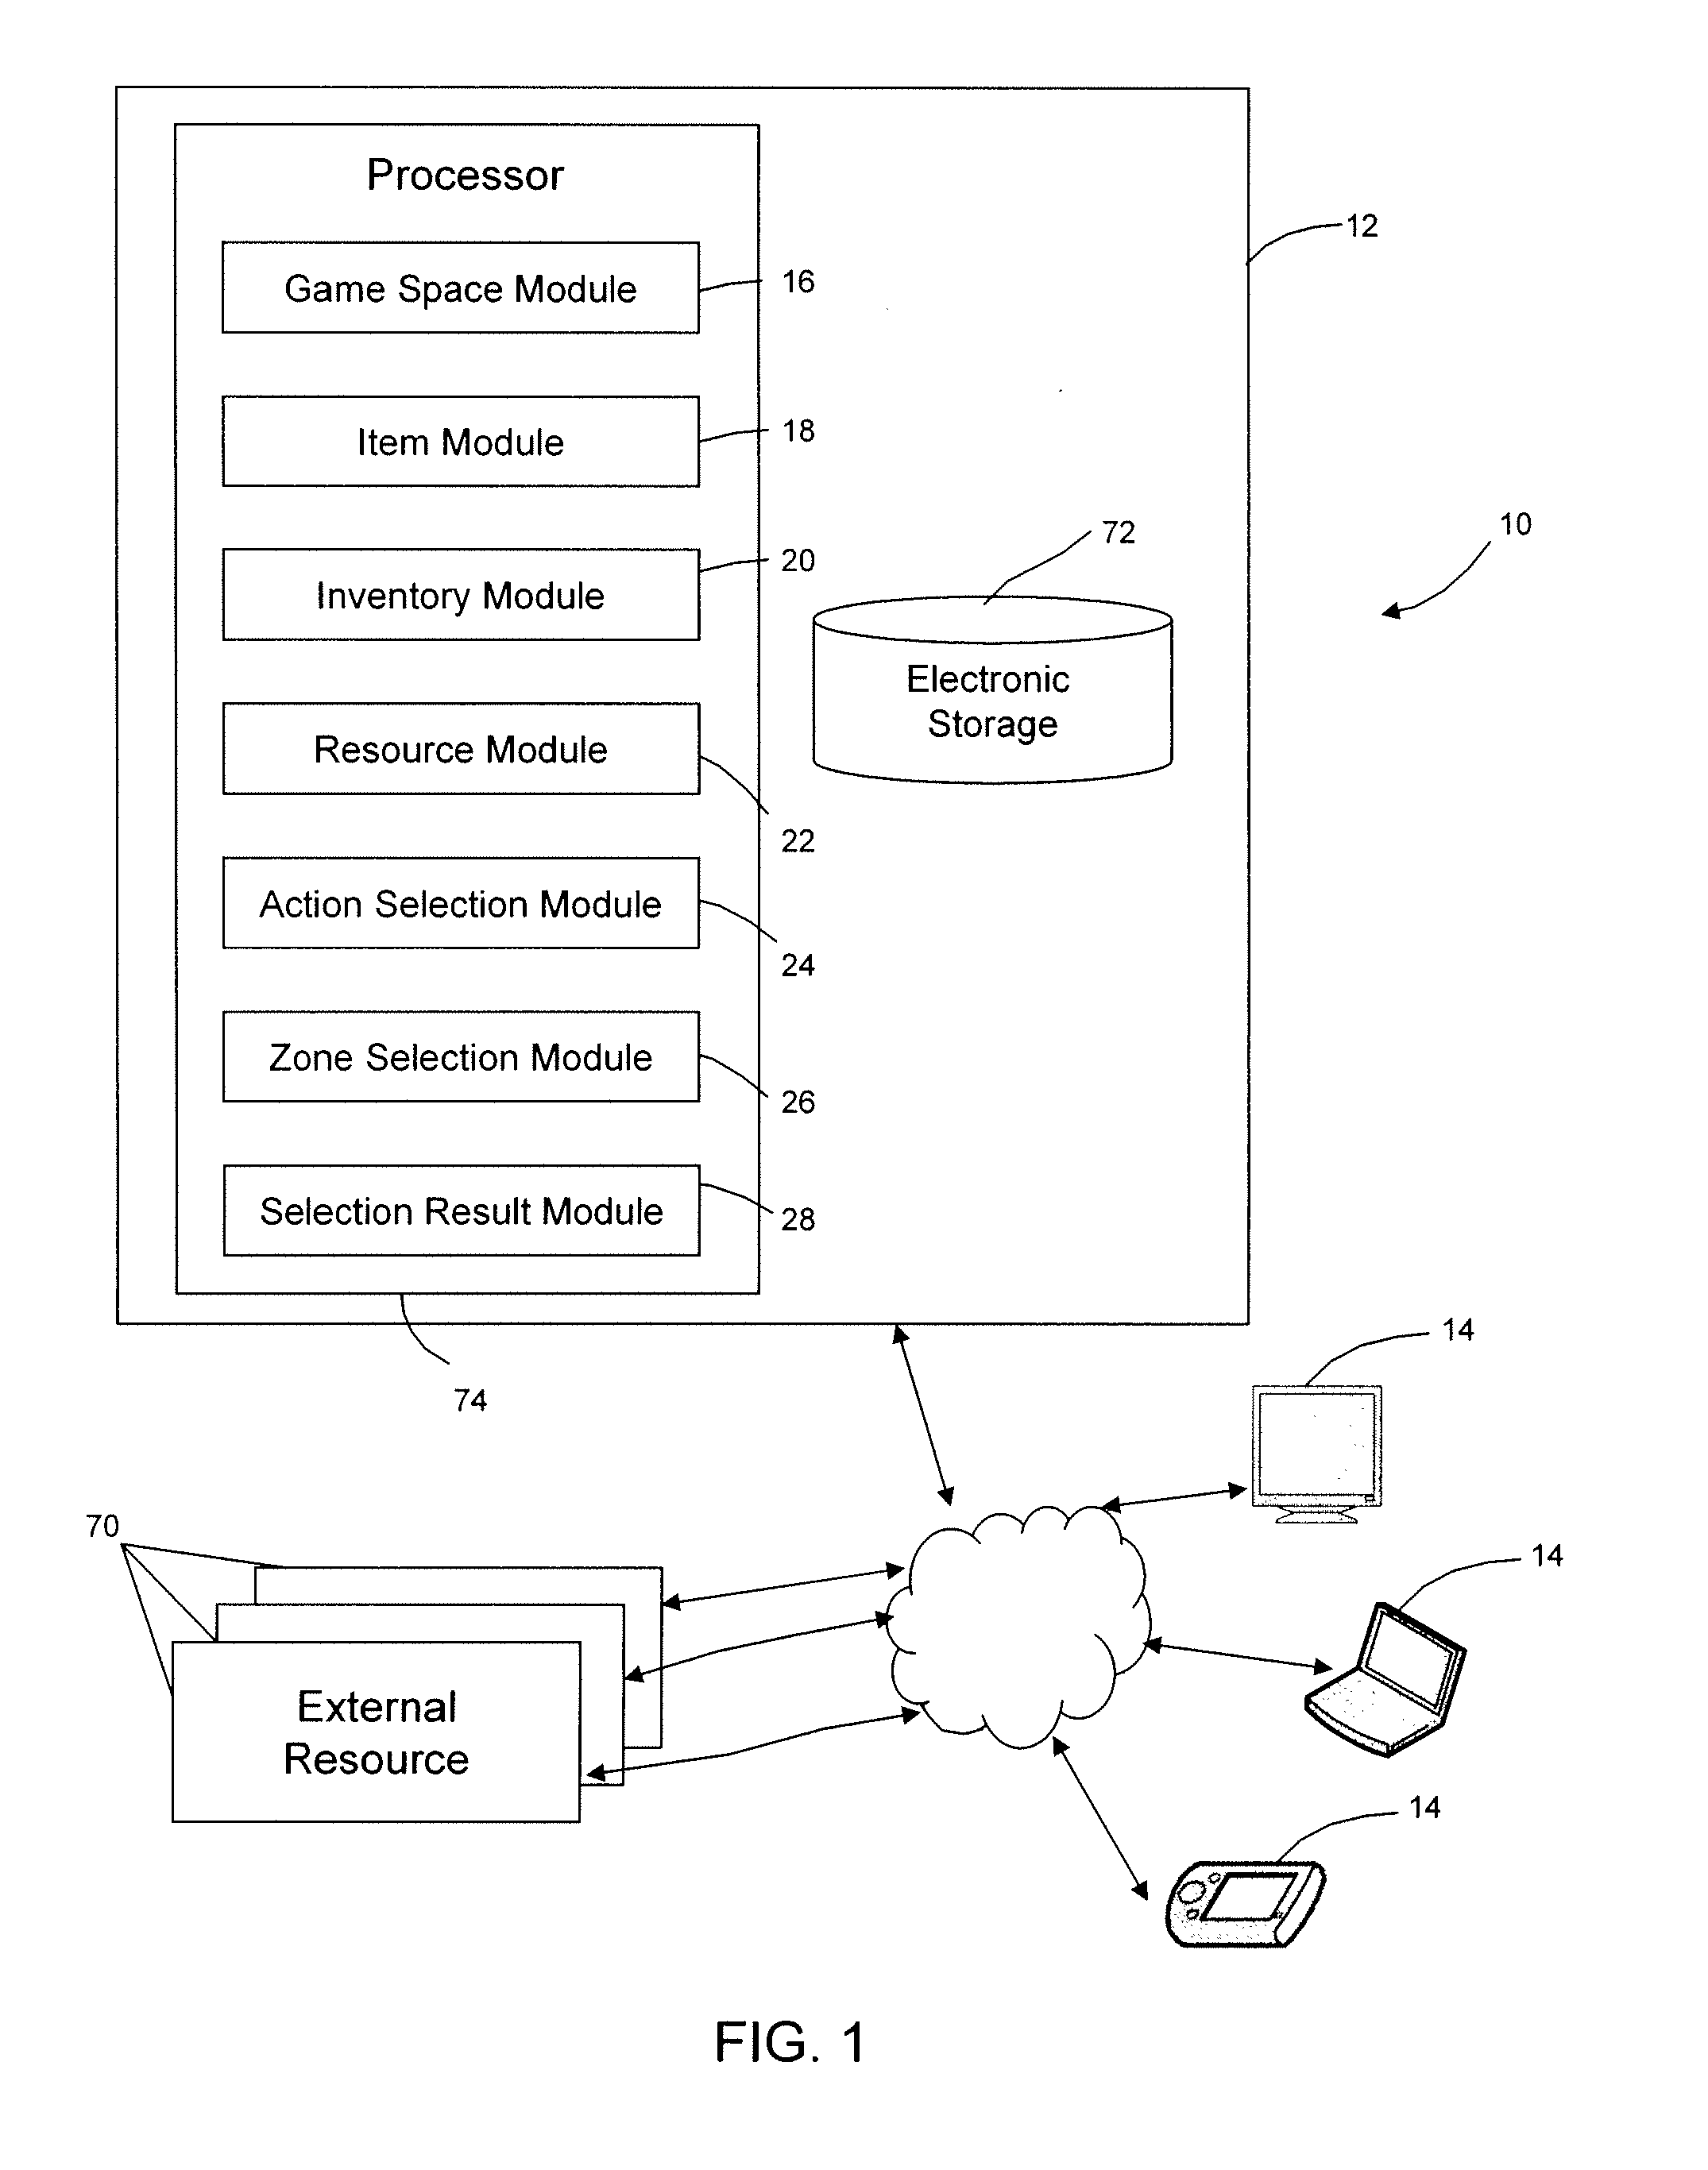 System and method for presenting a game space with discoverable items to be prospected